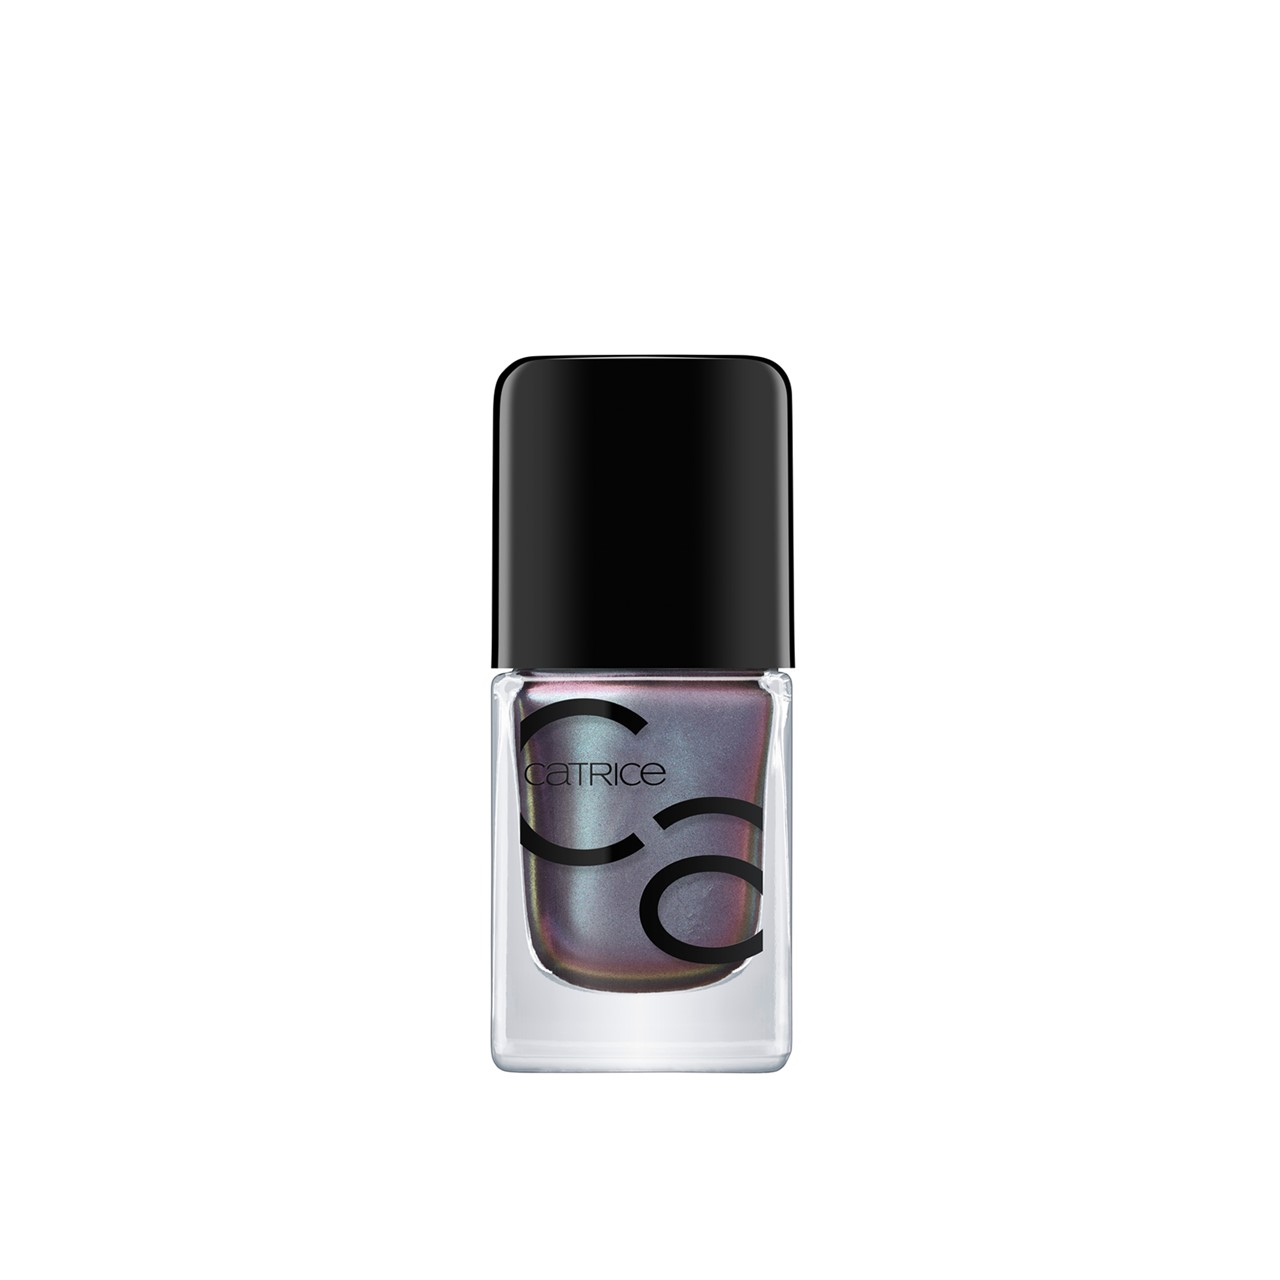 Catrice ICONails Gel Lacquer 18 Beetlejuice 10.5ml (0.36fl oz)